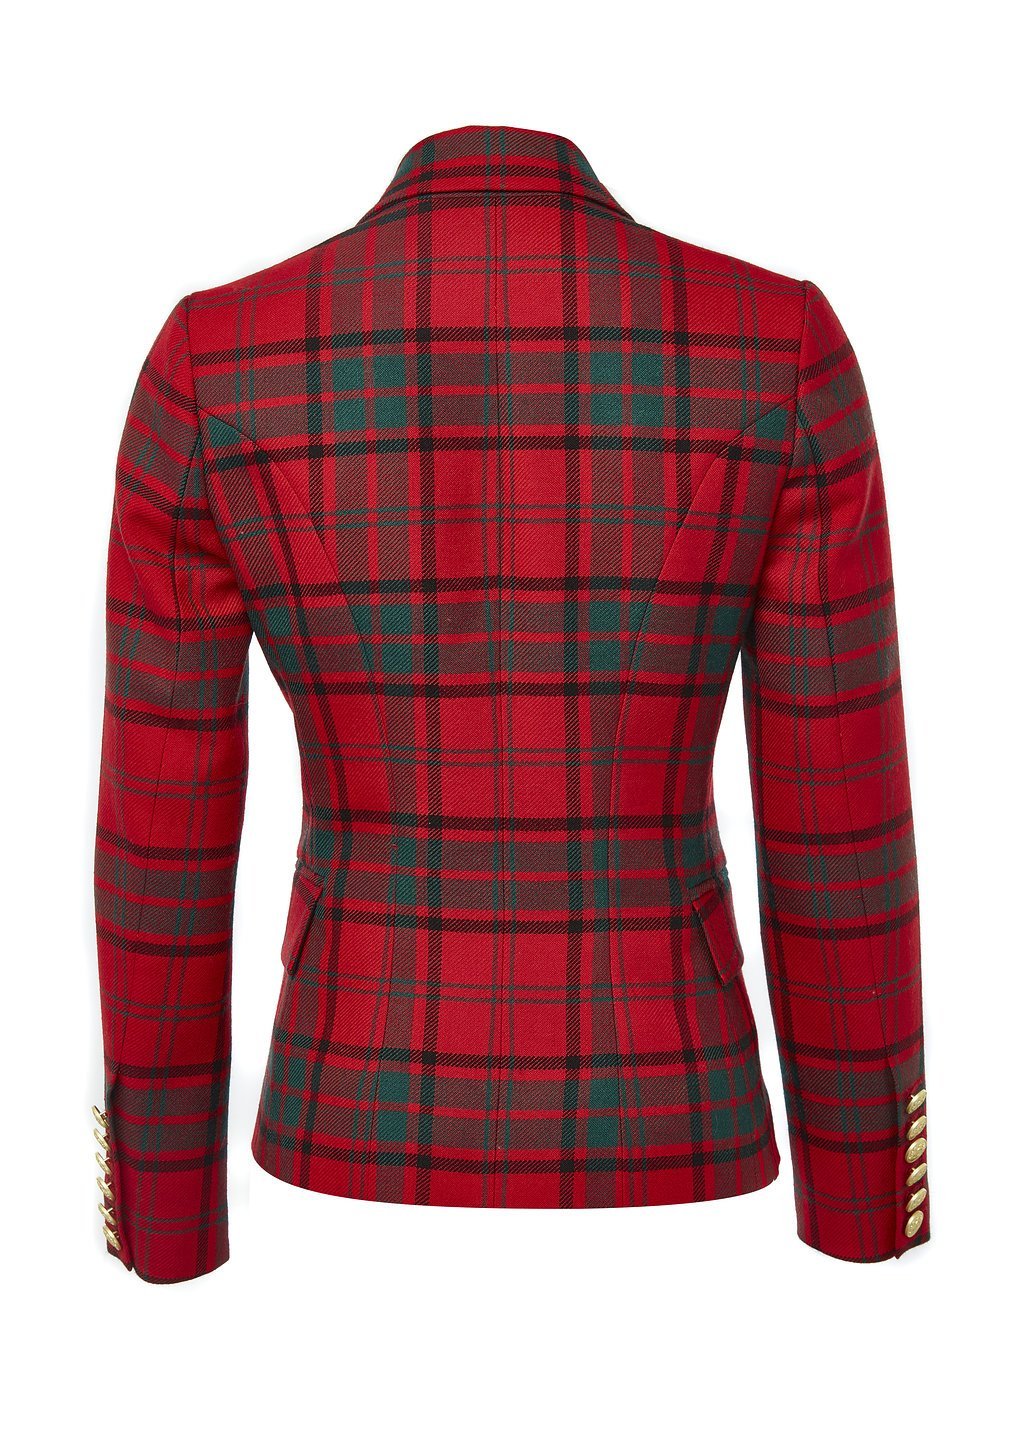 back of British made double breasted blazer that fastens with a single button hole to create a more form fitting silhouette with two pockets and gold button detailing this blazer is made from red and green tartan